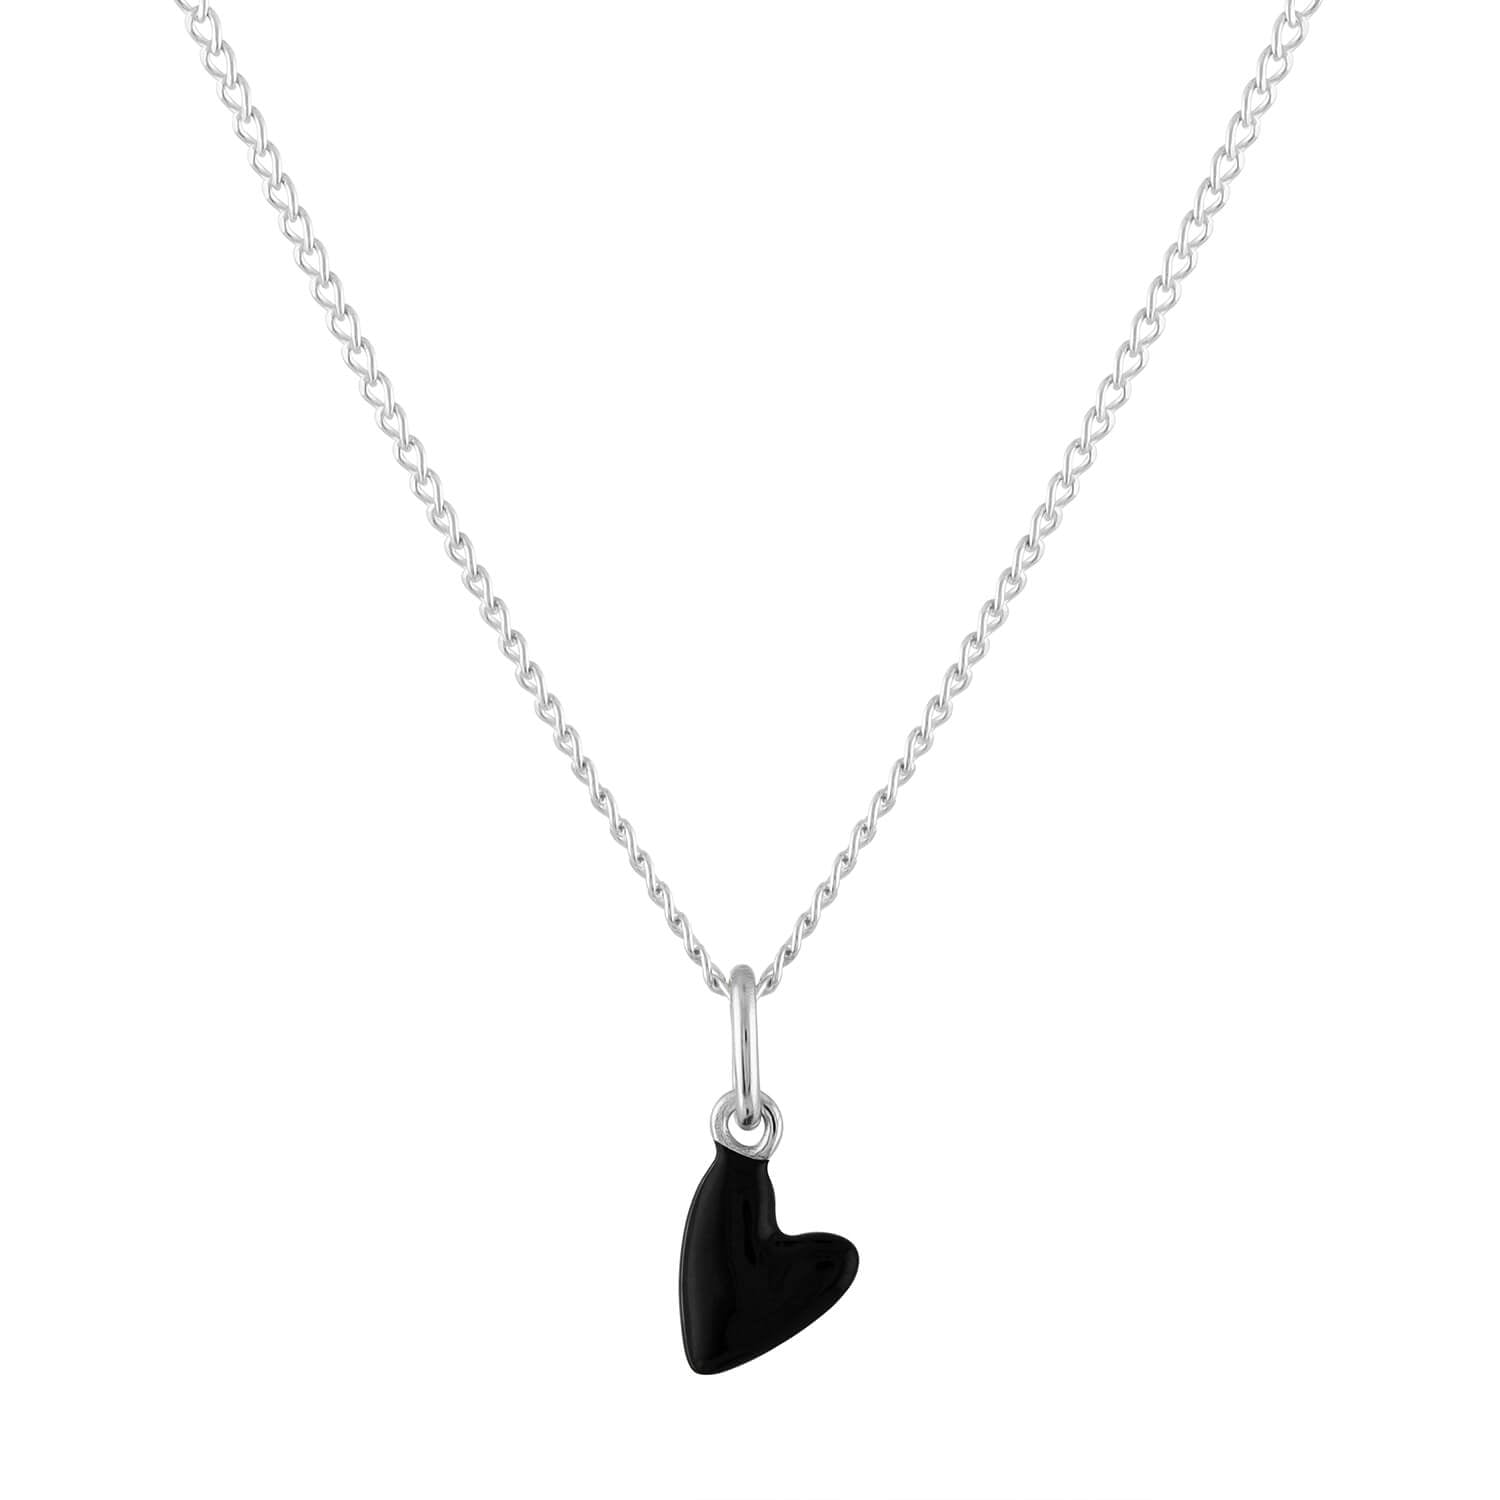 Black Heart Charm Necklace in Sterling Silver